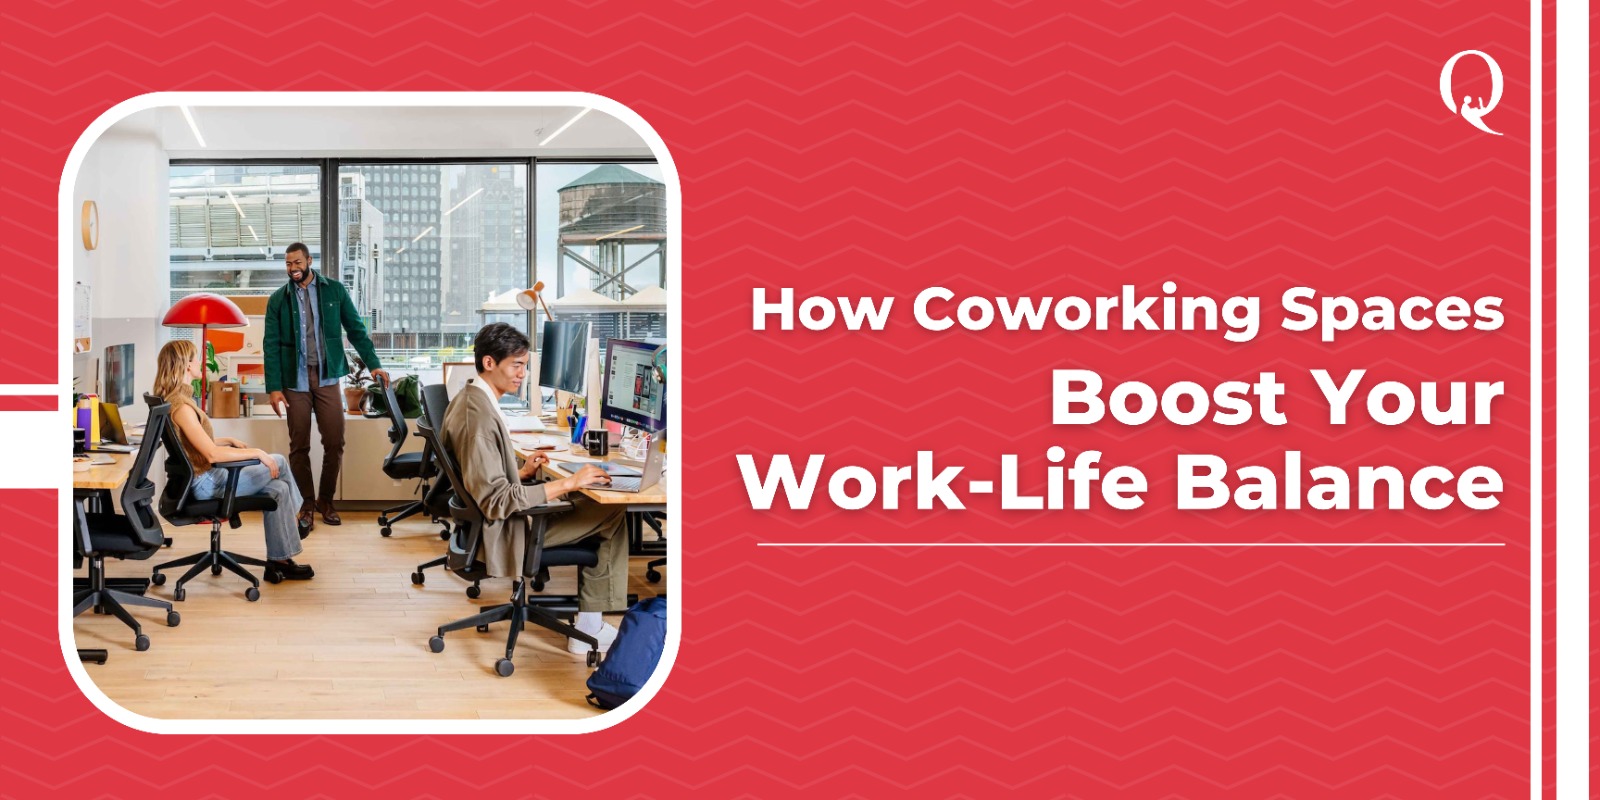 How Coworking Spaces Promote Work-Life Balance